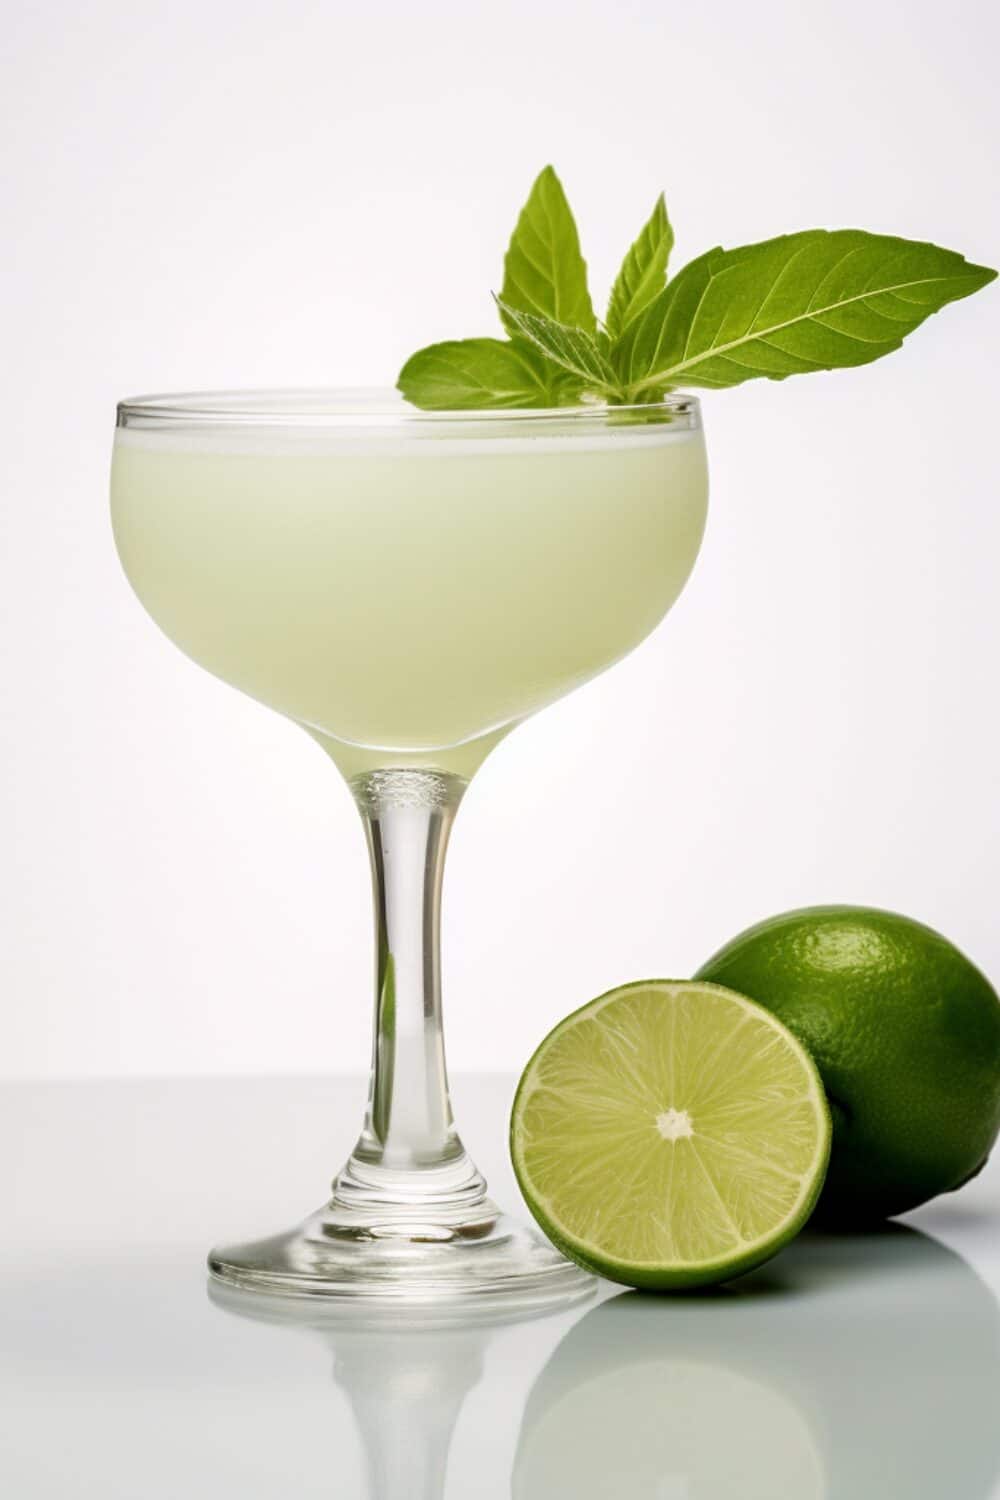 A minty and citrusy cocktail made with gin, lime juice, sugar-free sweetener, and fresh mint leaves, served over ice.